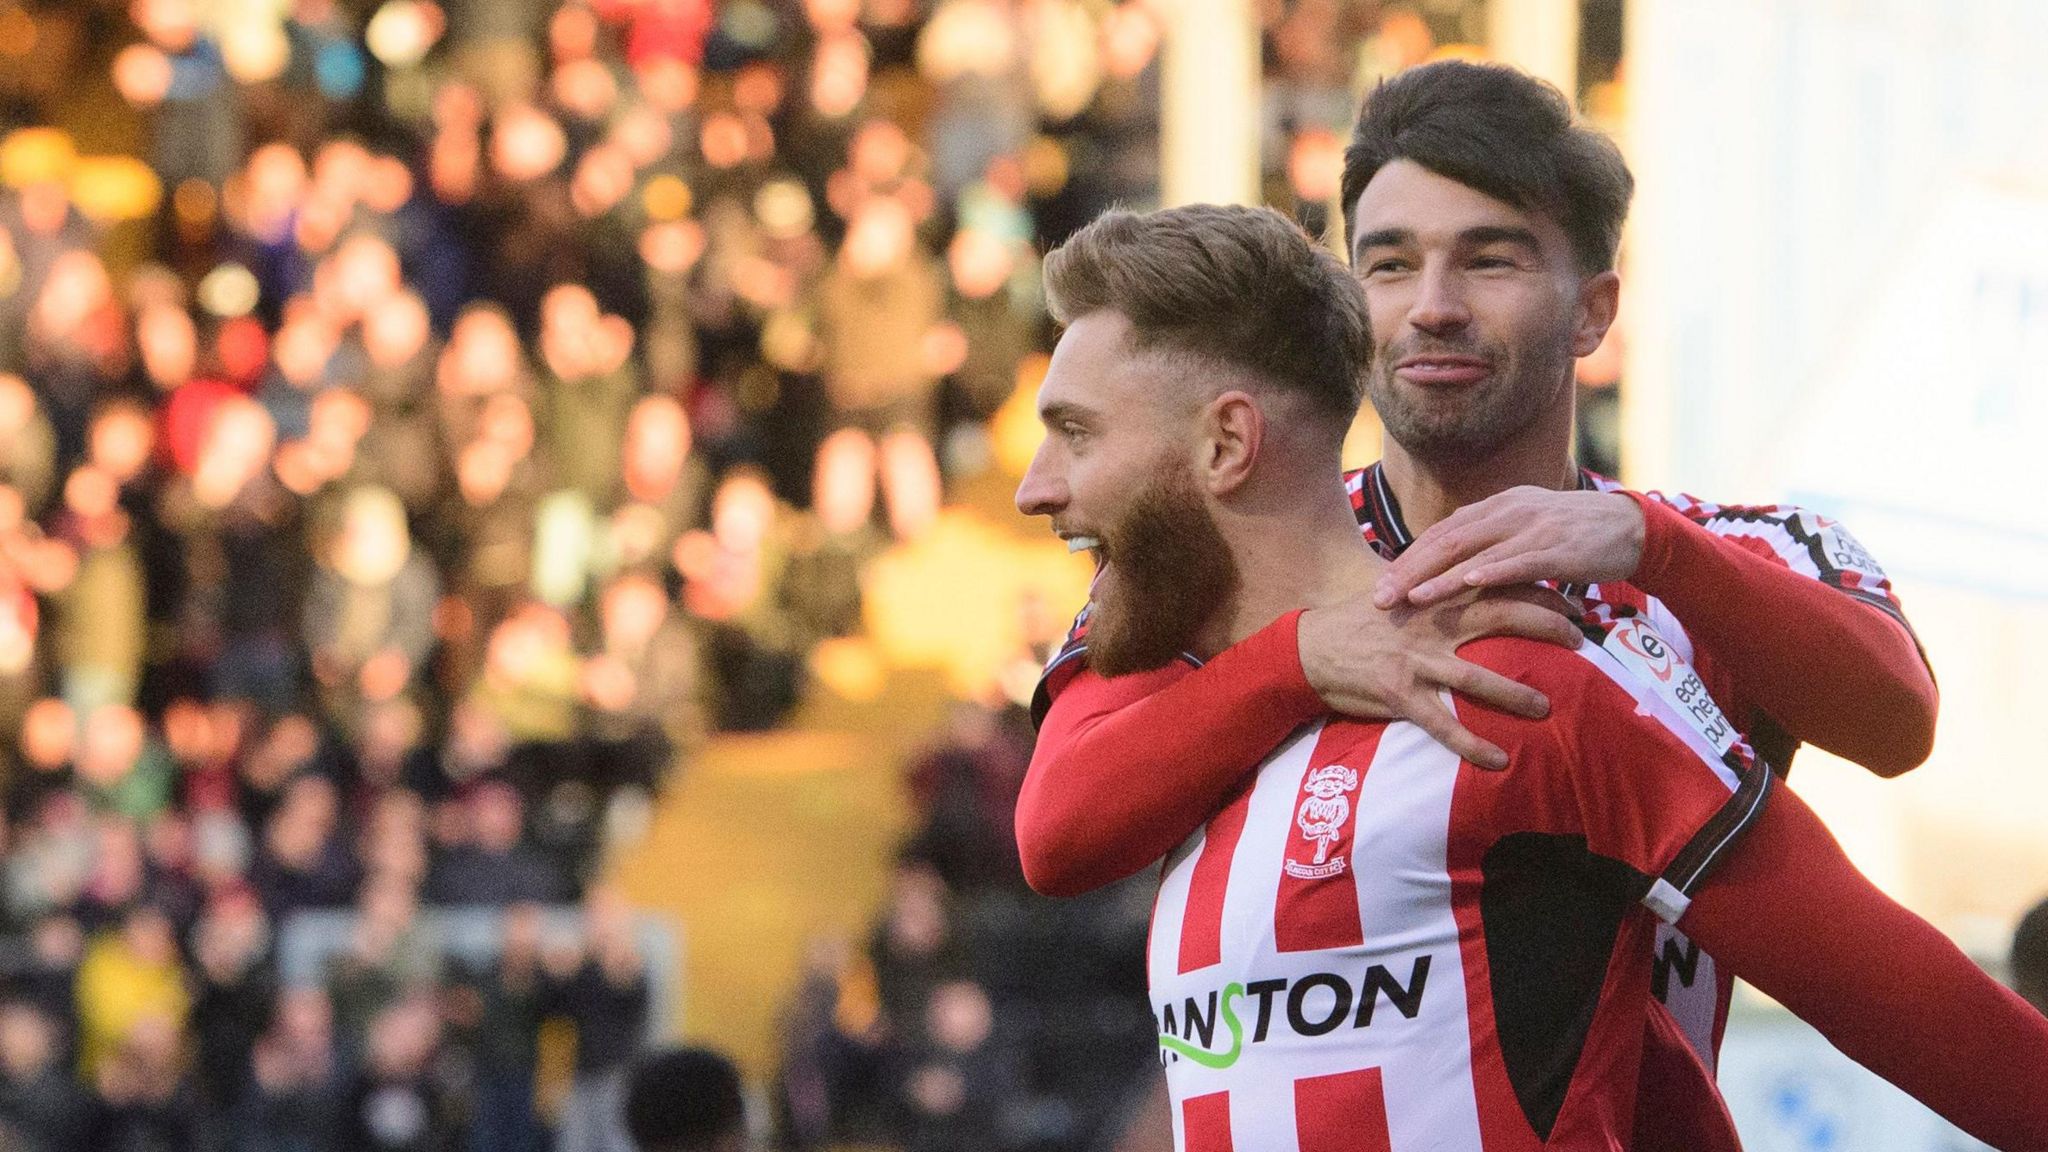 Lincoln City's Ted Bishop, left, celebrates scoring with team-mate Danny Mandroiu